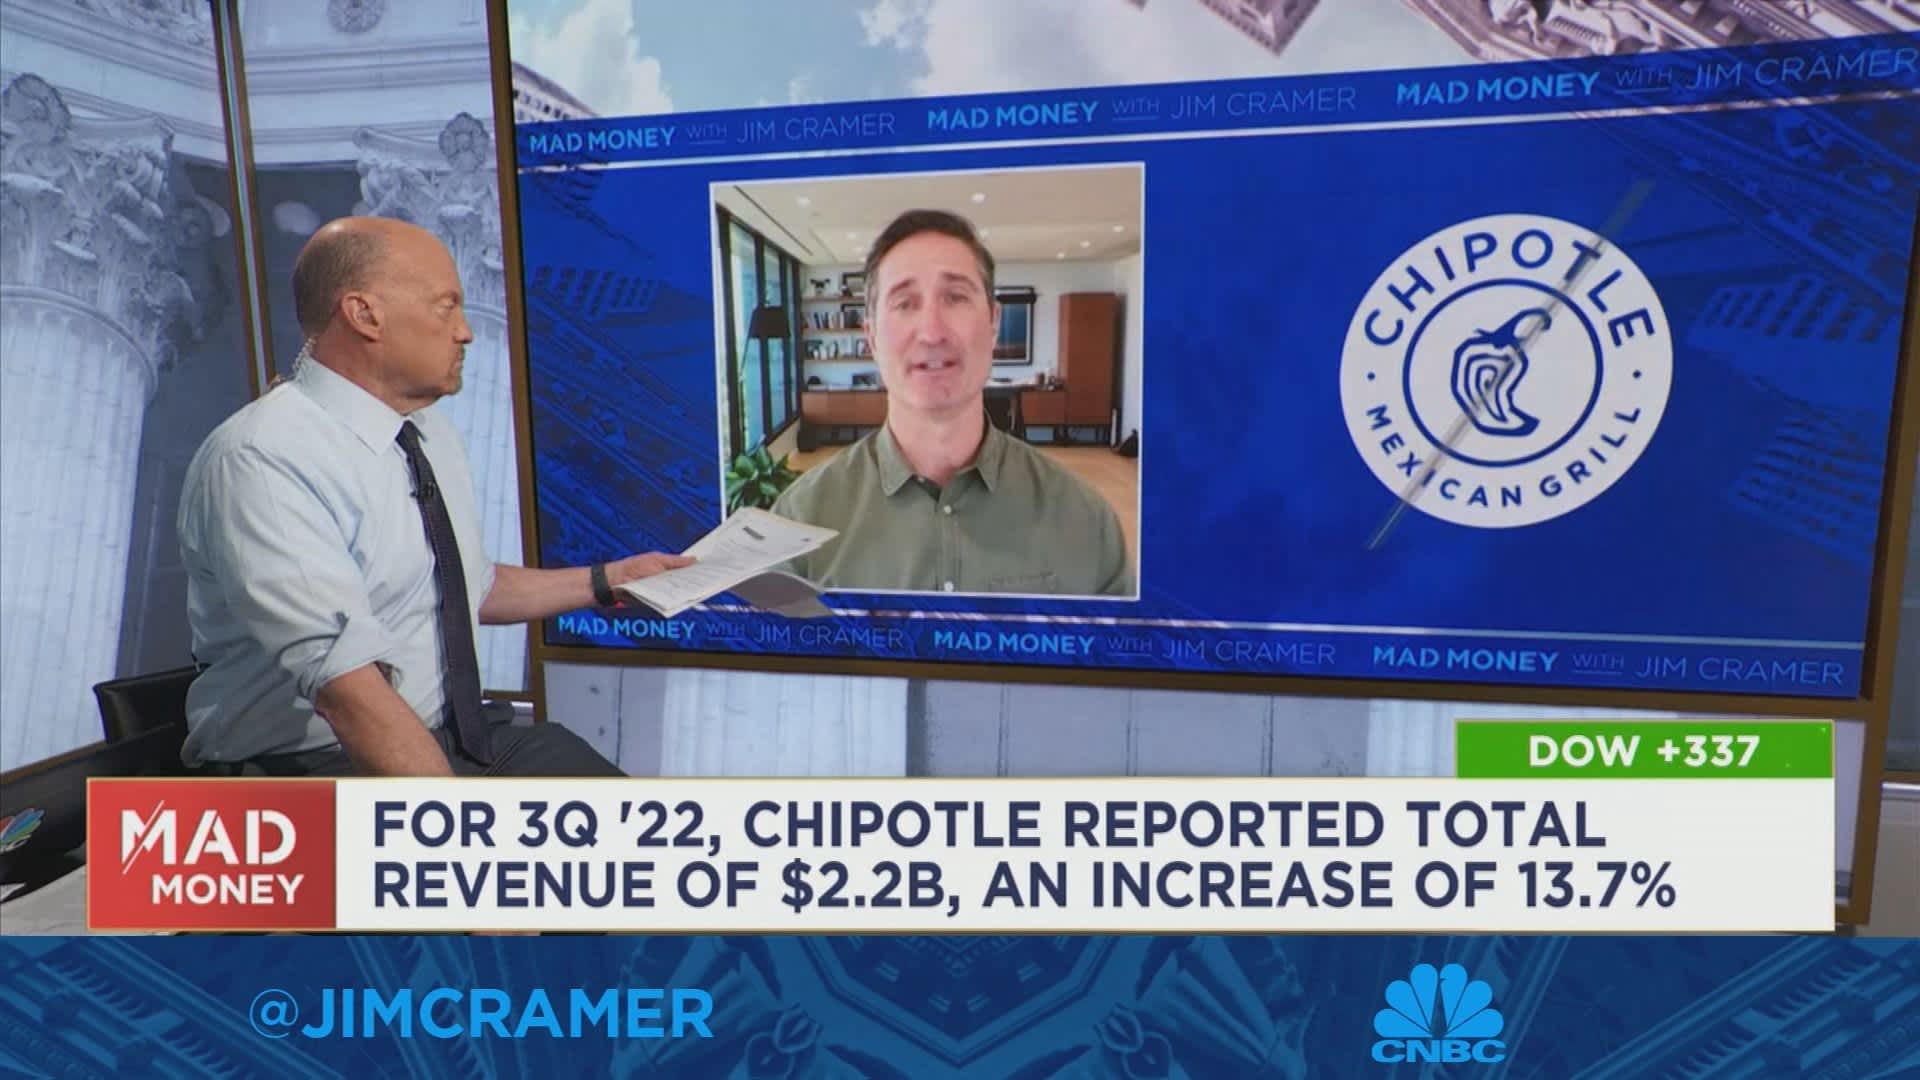 Chipotle CEO says costs are up over 20% on a two-year basis, discusses company's pricing strategy